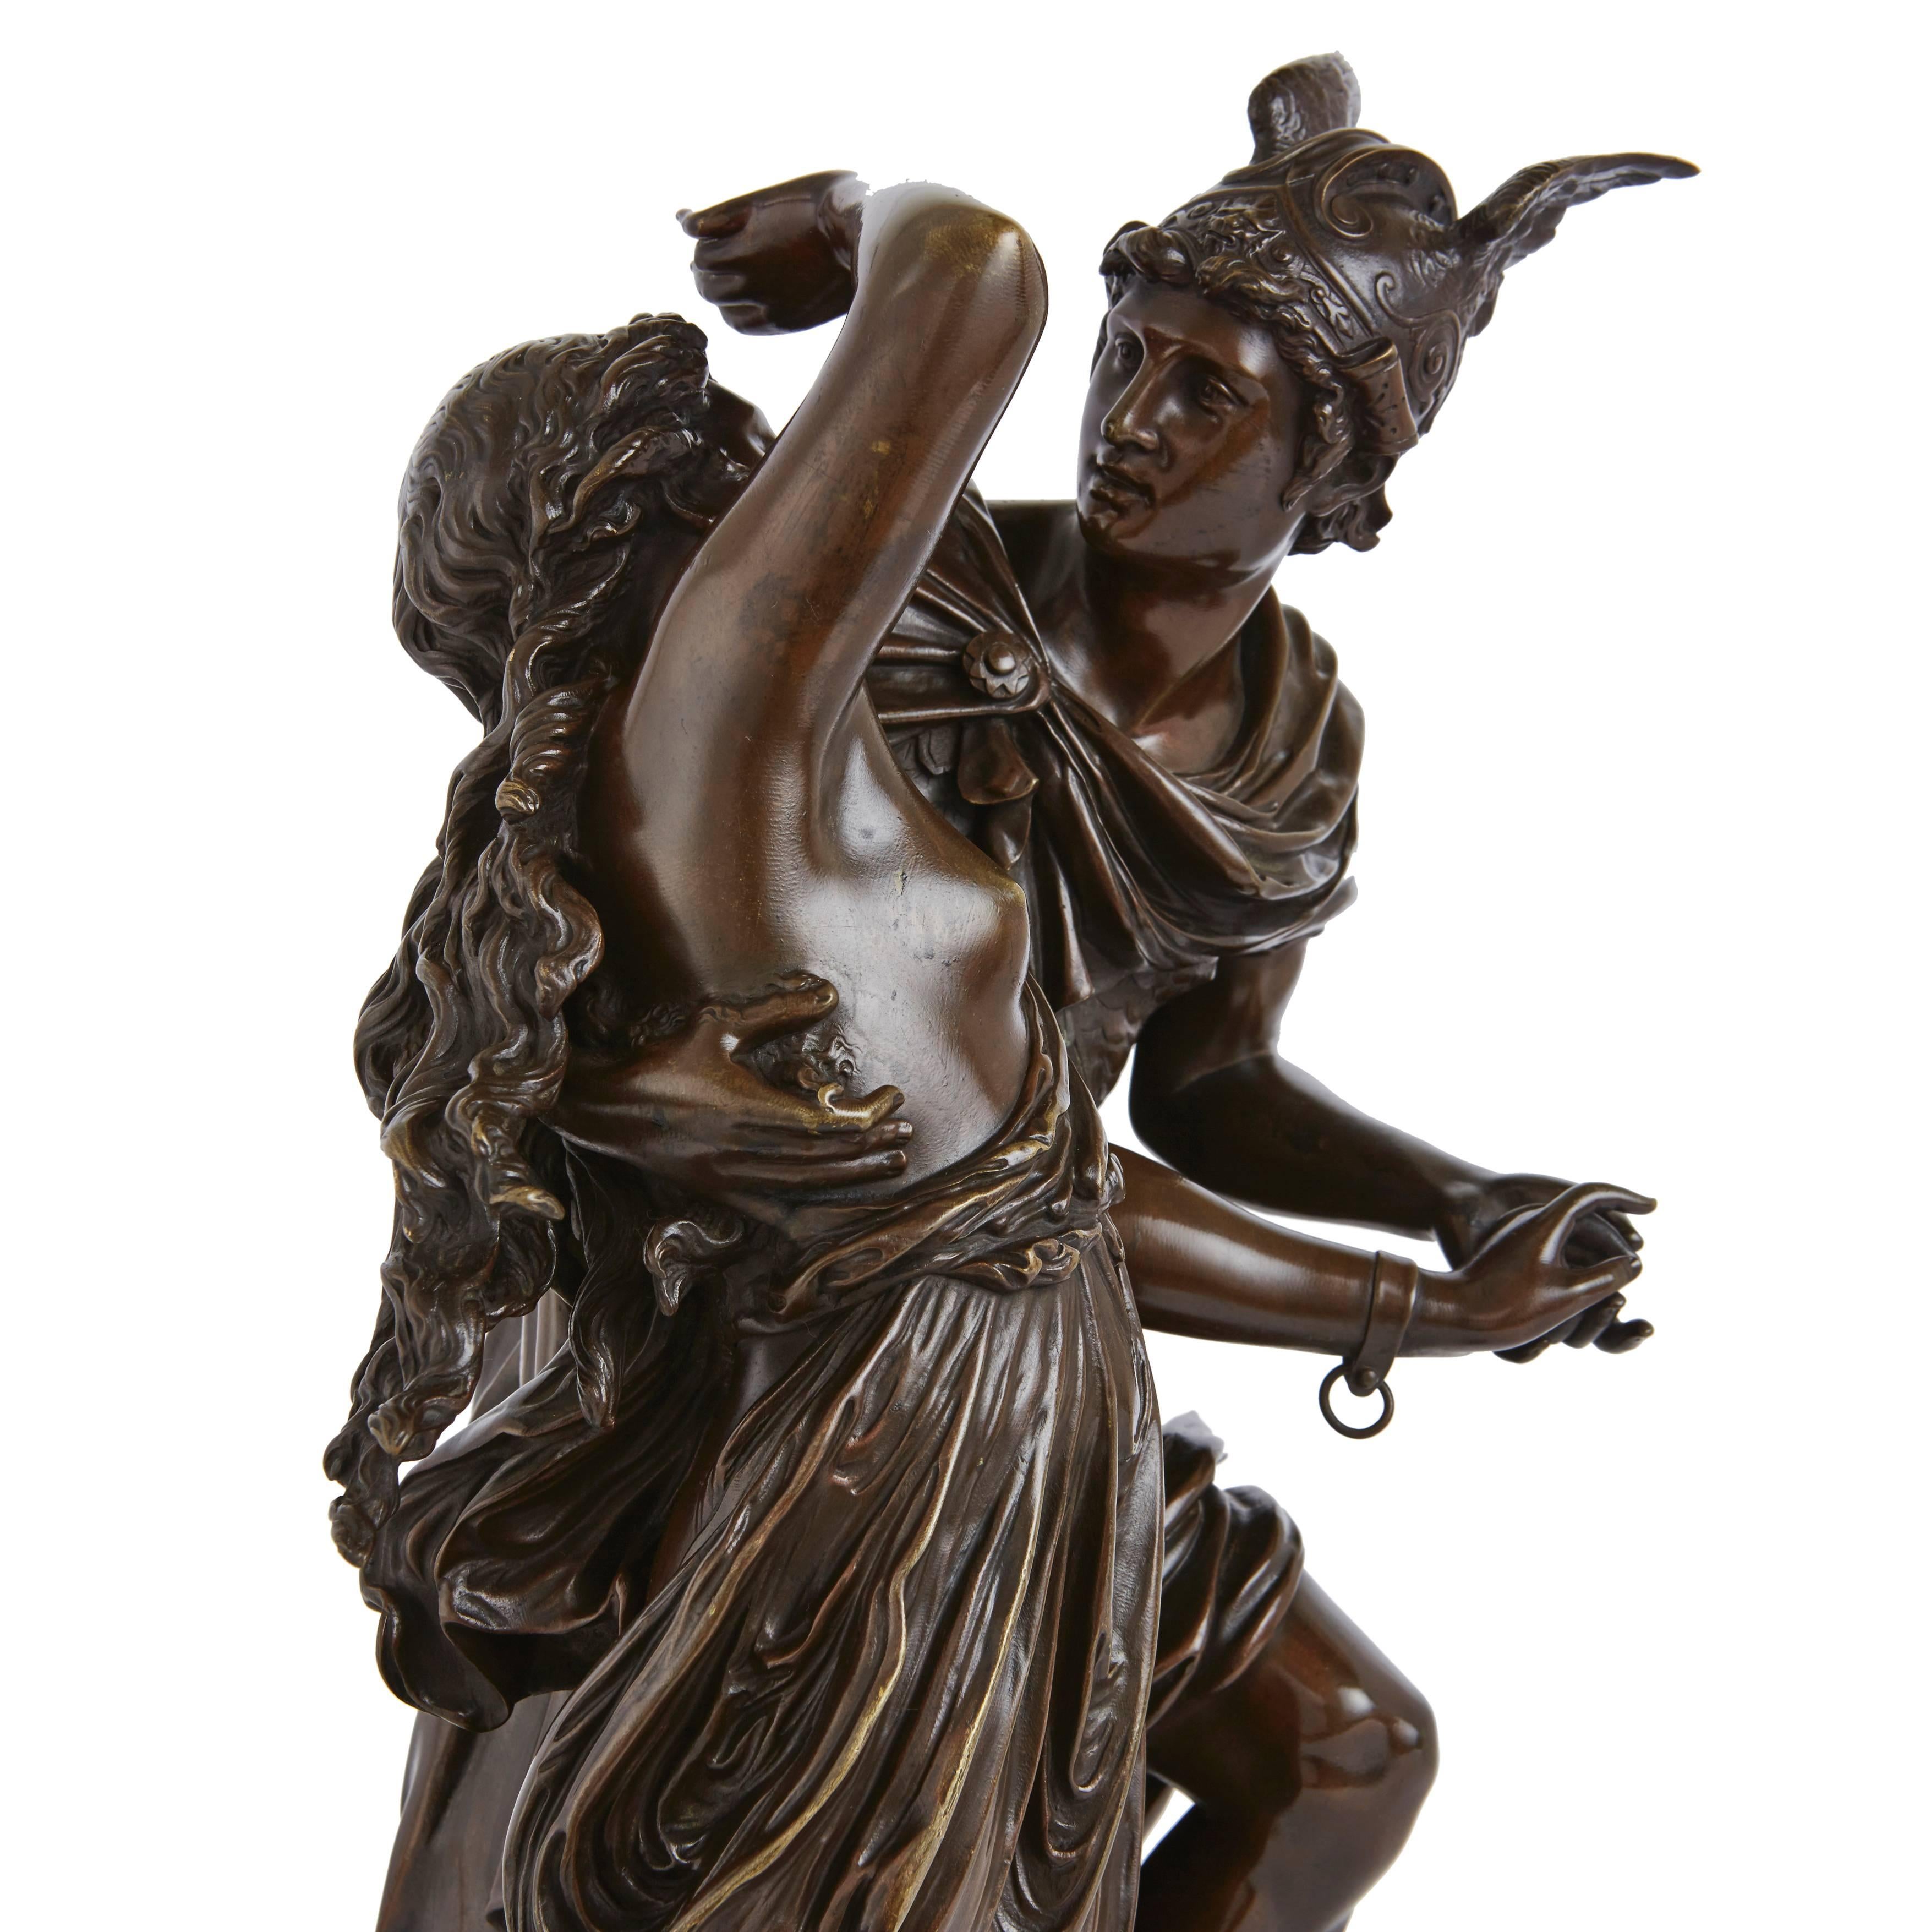 The patinated bronze sculpture standing on naturalistic circular base, signed 'L. Grégoire' on base

Jean Louis Grégoire (French, 1840-1890) was born and died in Paris. Training under Salmson at the Ecole des Beaux-Arts, he exhibited at the